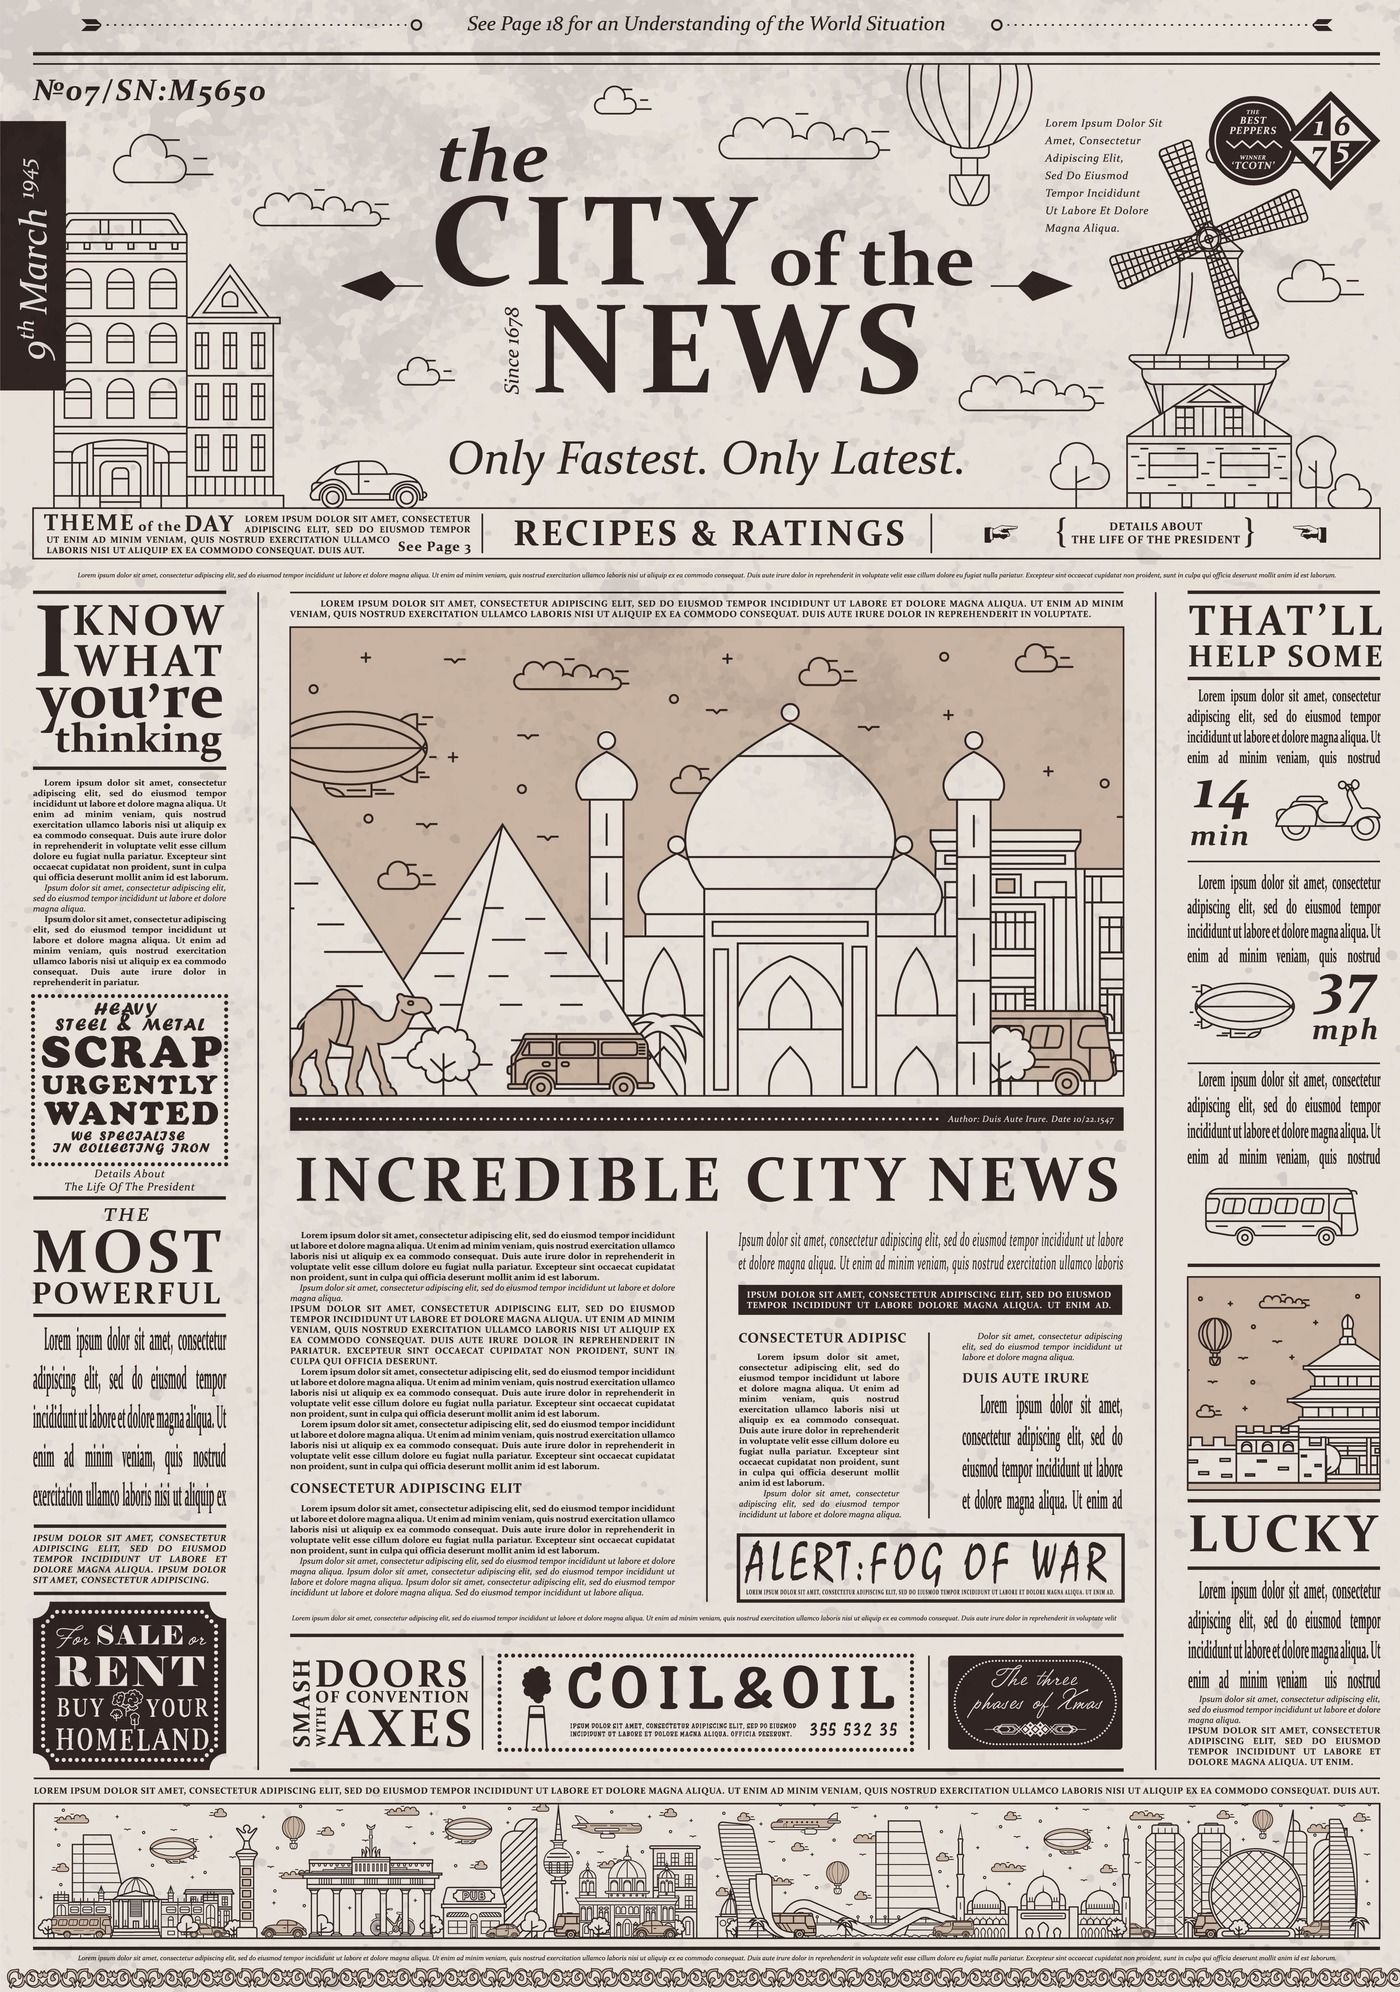 Ori 3511604 F5fc18b2ffbc51fe321eee437bd5efc818c273bc Design Of Old Vintage Newspaper Template Showing Articles 